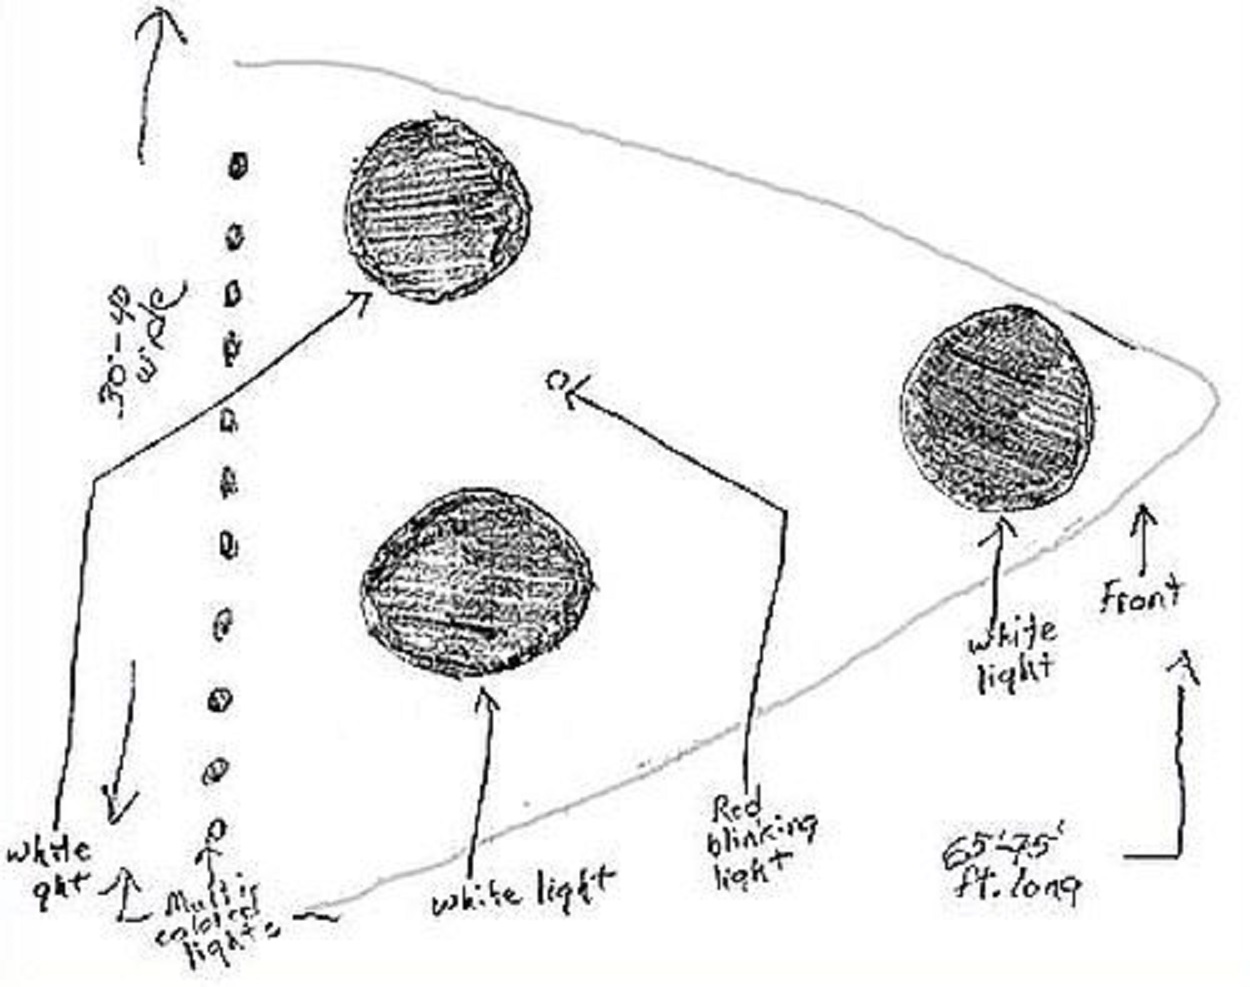 Sketch of the object witnessed by Barton 